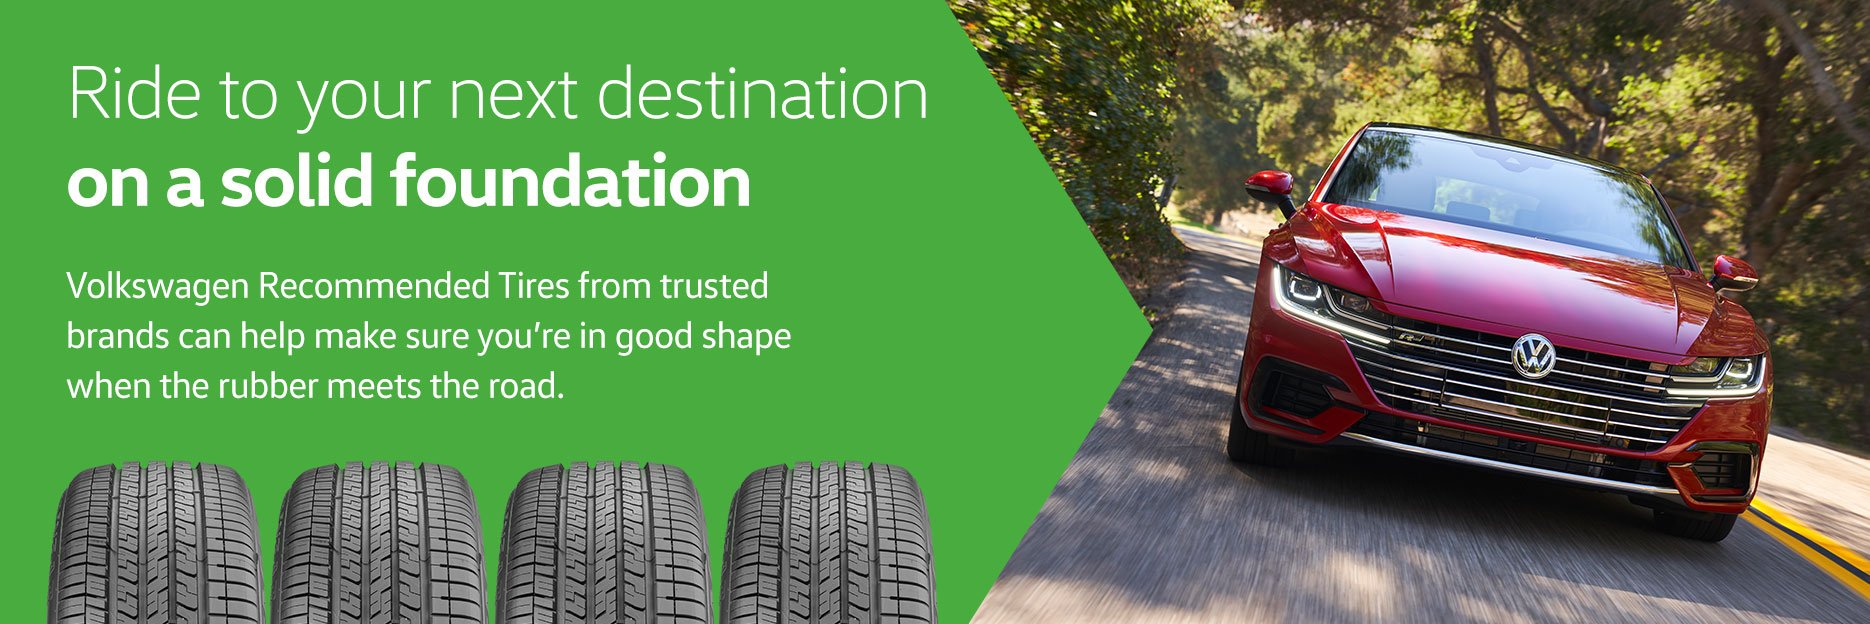 Ride to your next destination on a solid foundation. Volkswagen Recommended Tires from trusted brands can help make sure you're in good shape when the rubber meets the road.